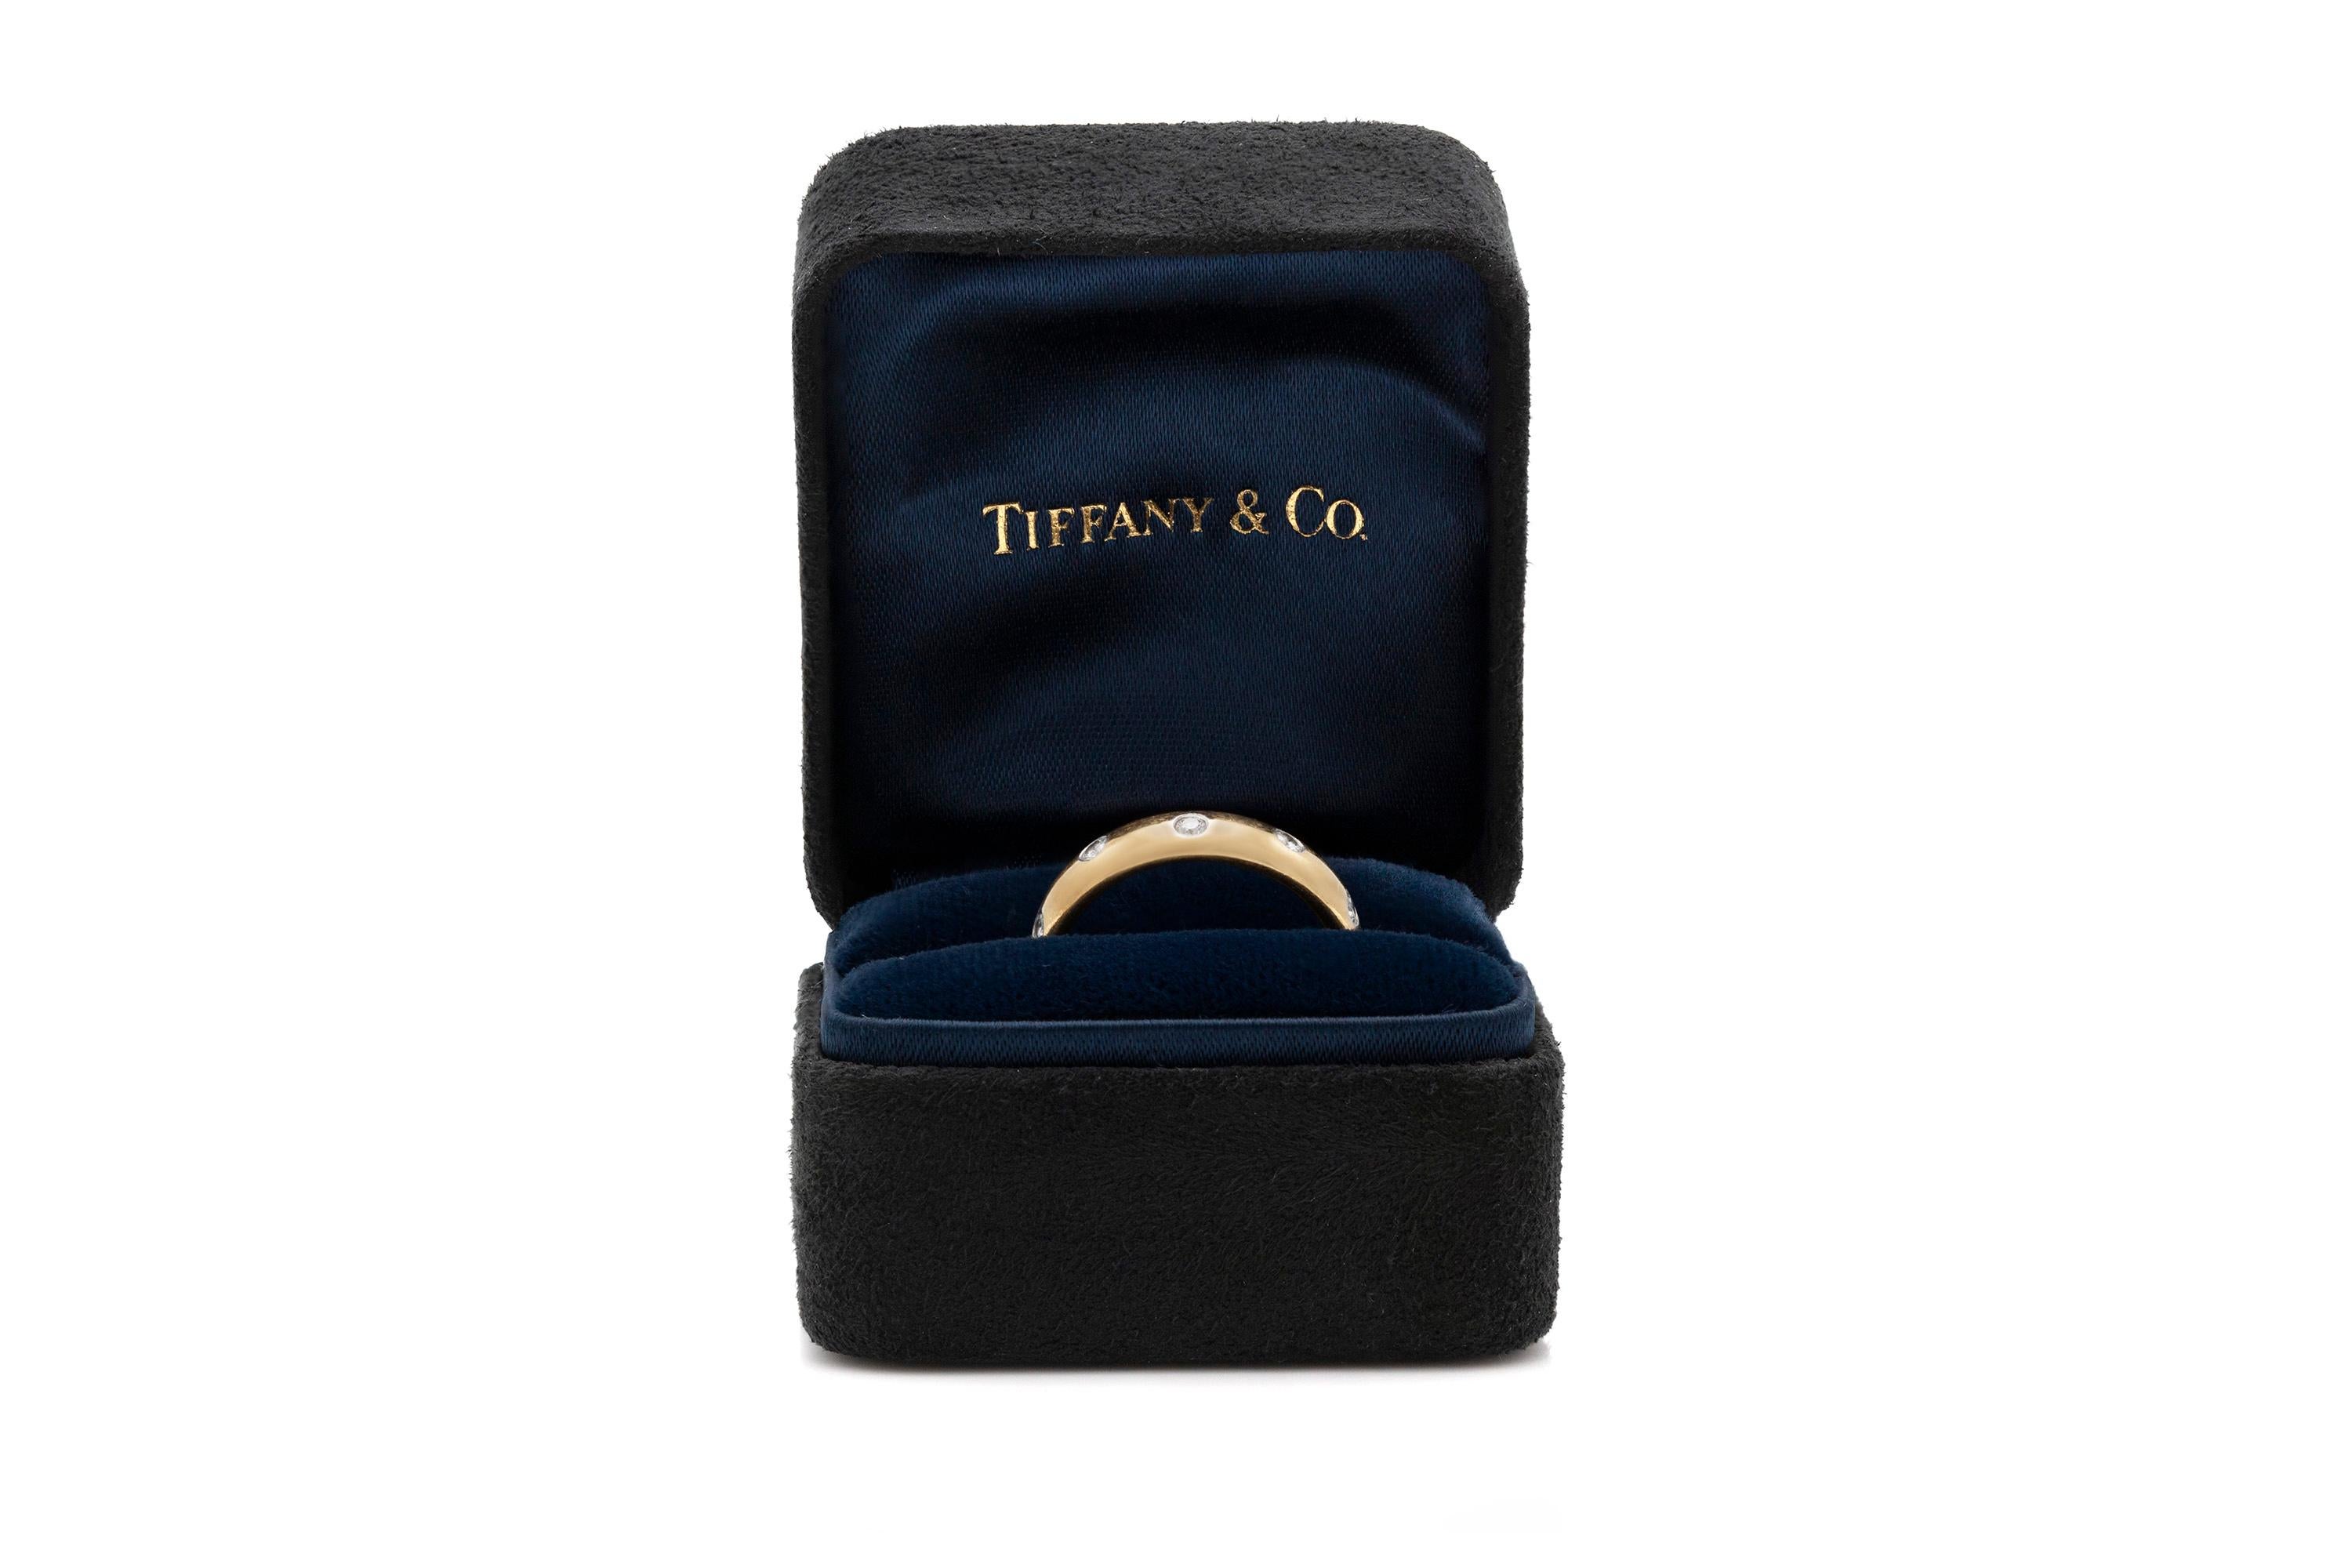 Finely crafted in 18k yellow gold with diamonds. Signed by Tiffany & Co, from the Etoile collection.